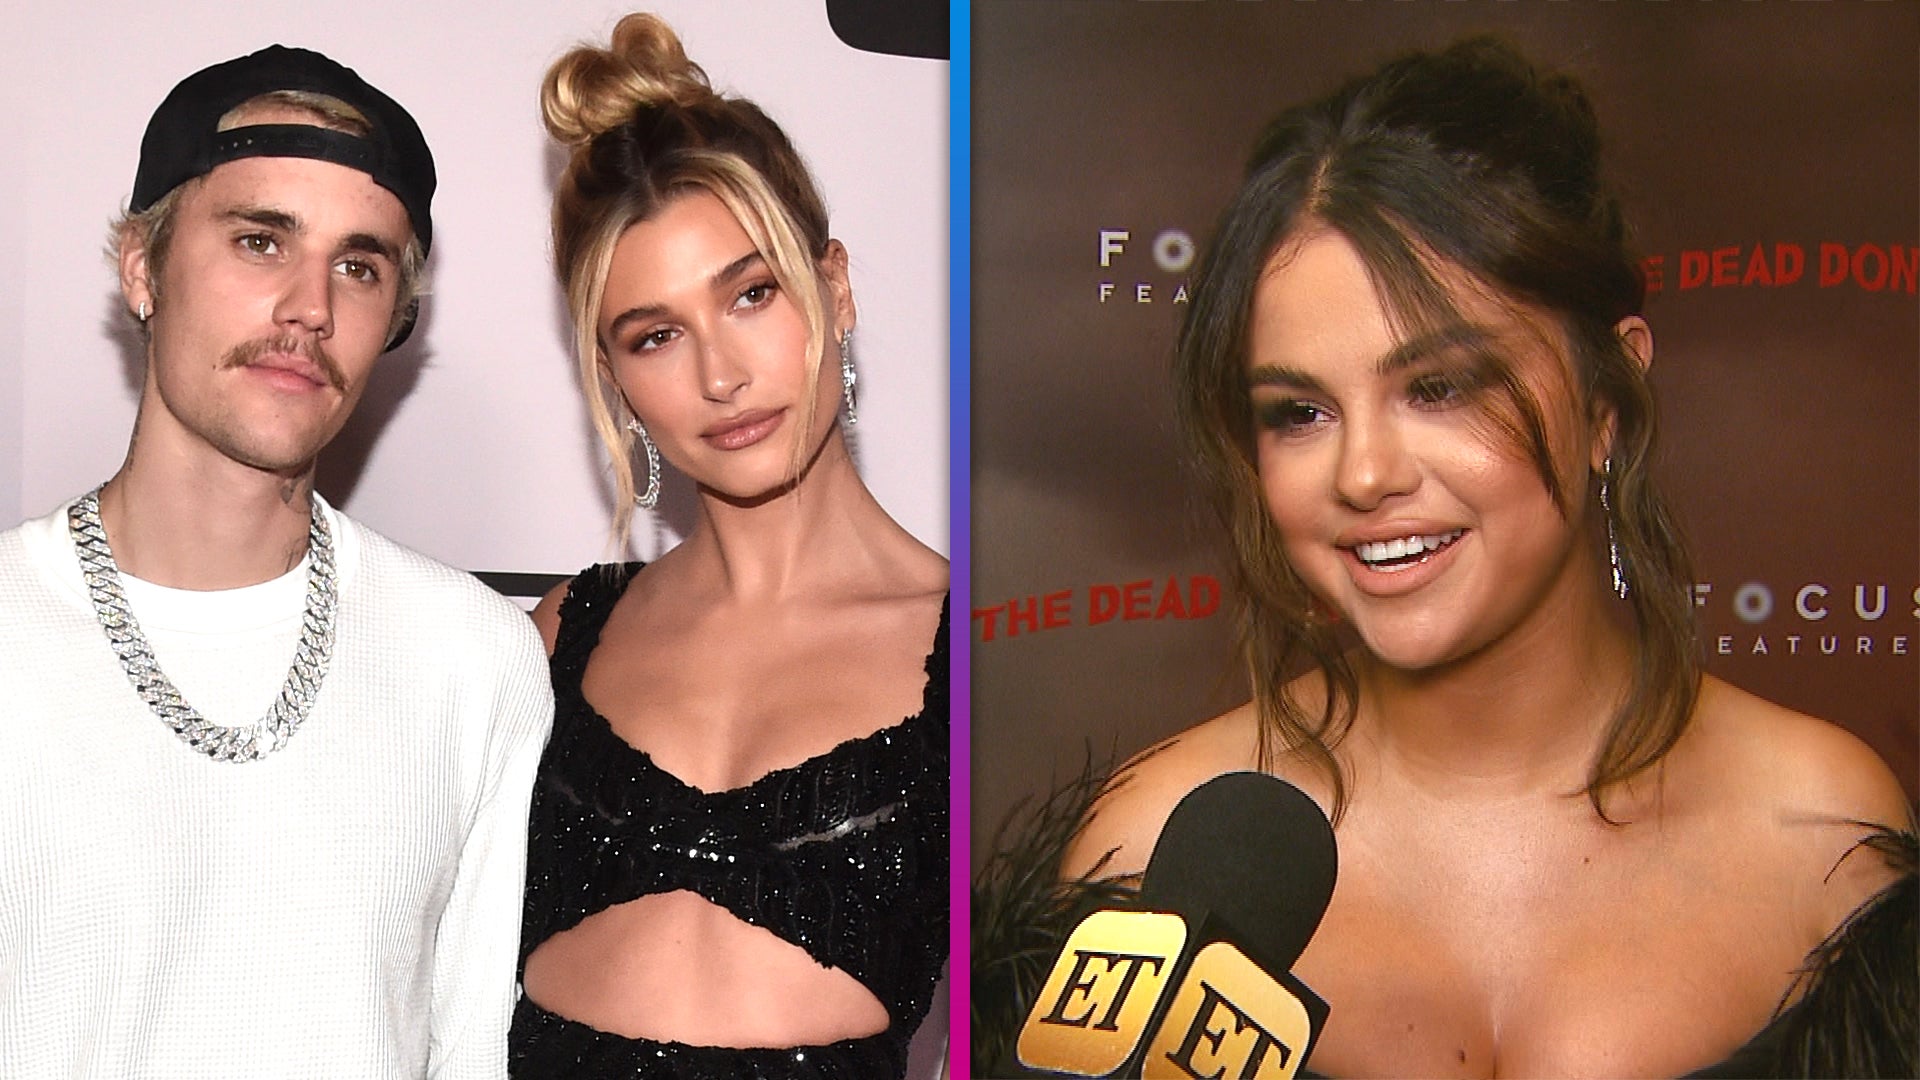 Hailey Bieber Has 'Been Leaning on Justin' Amid Selena Drama